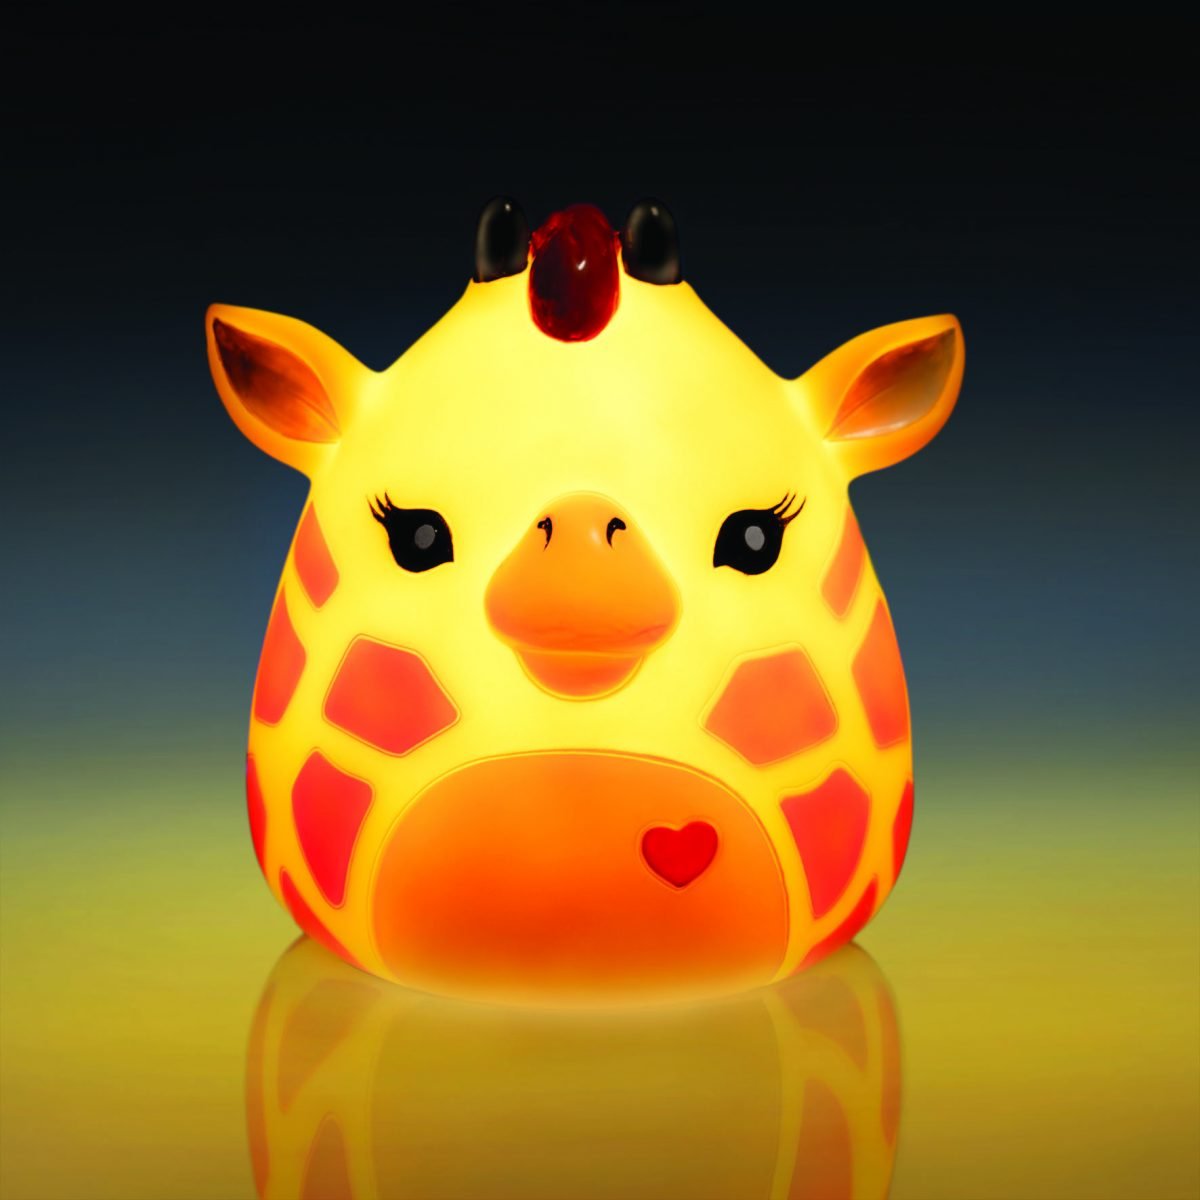 Smoosho’s Pals Giraffe Table Lamp Adorable giraffe table lamp based on our lovable Smoosho’s Pals! Lights up the room with a comforting warm glow Makes a magical ornament during the day Low voltage LED safe for children The adorable Smoosho’s Pals Giraffe lamp is the perfect combo of function and decor! It blends right into a fun kid’s room during the day, and lights up with a golden glow at night. Great for bedtime stories or as a nightlight to ensure sweet dreams for your little one.